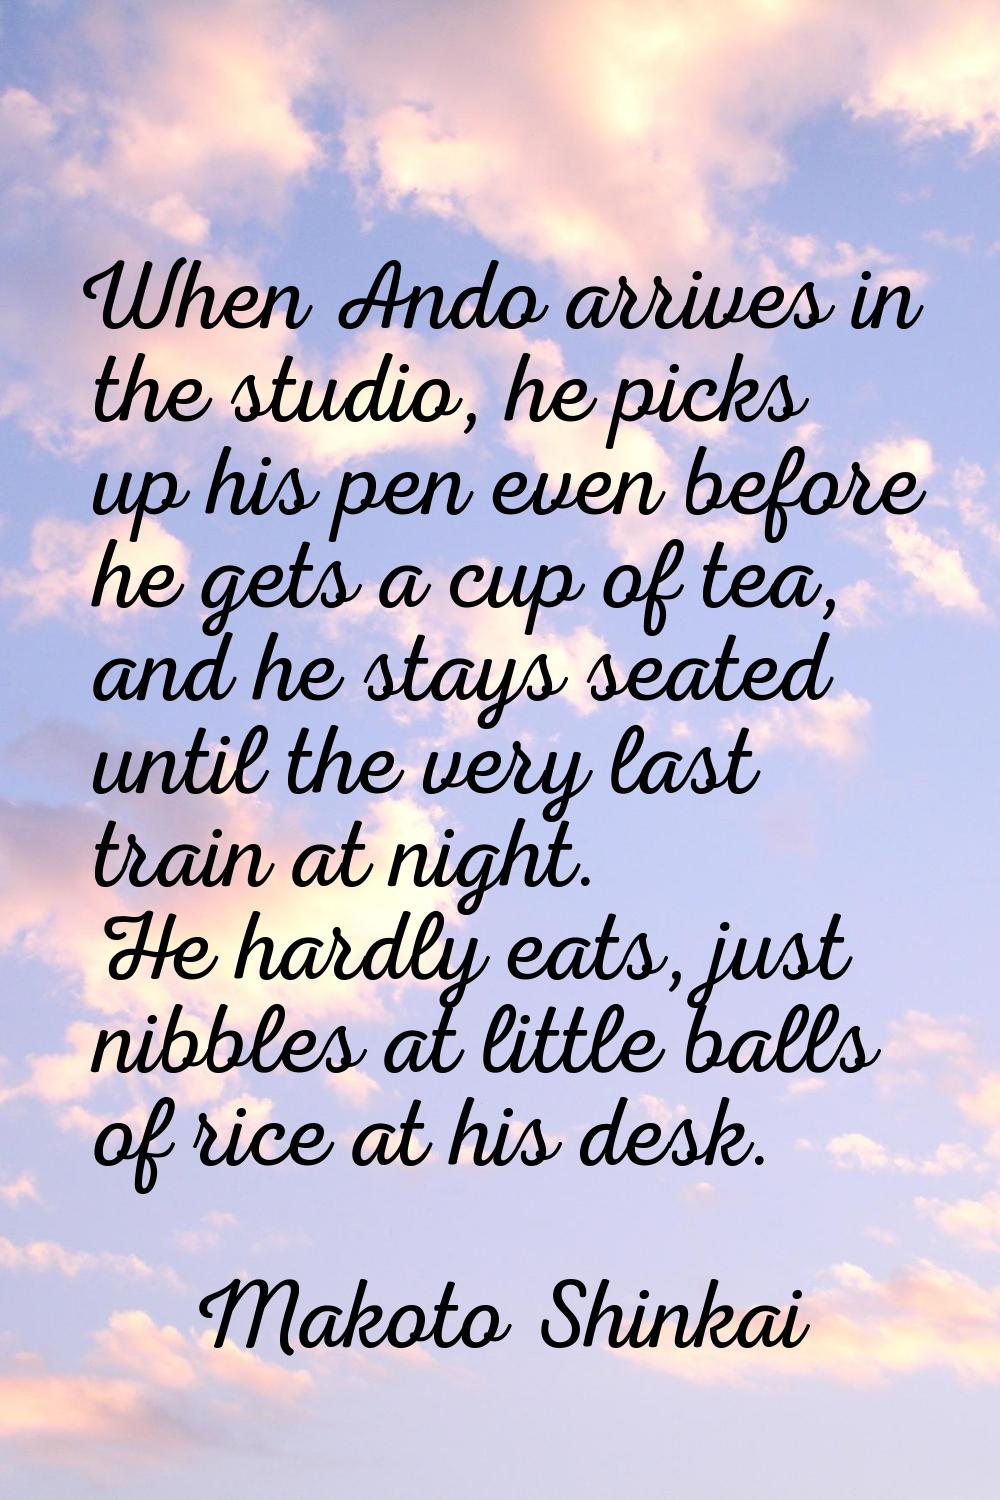 When Ando arrives in the studio, he picks up his pen even before he gets a cup of tea, and he stays